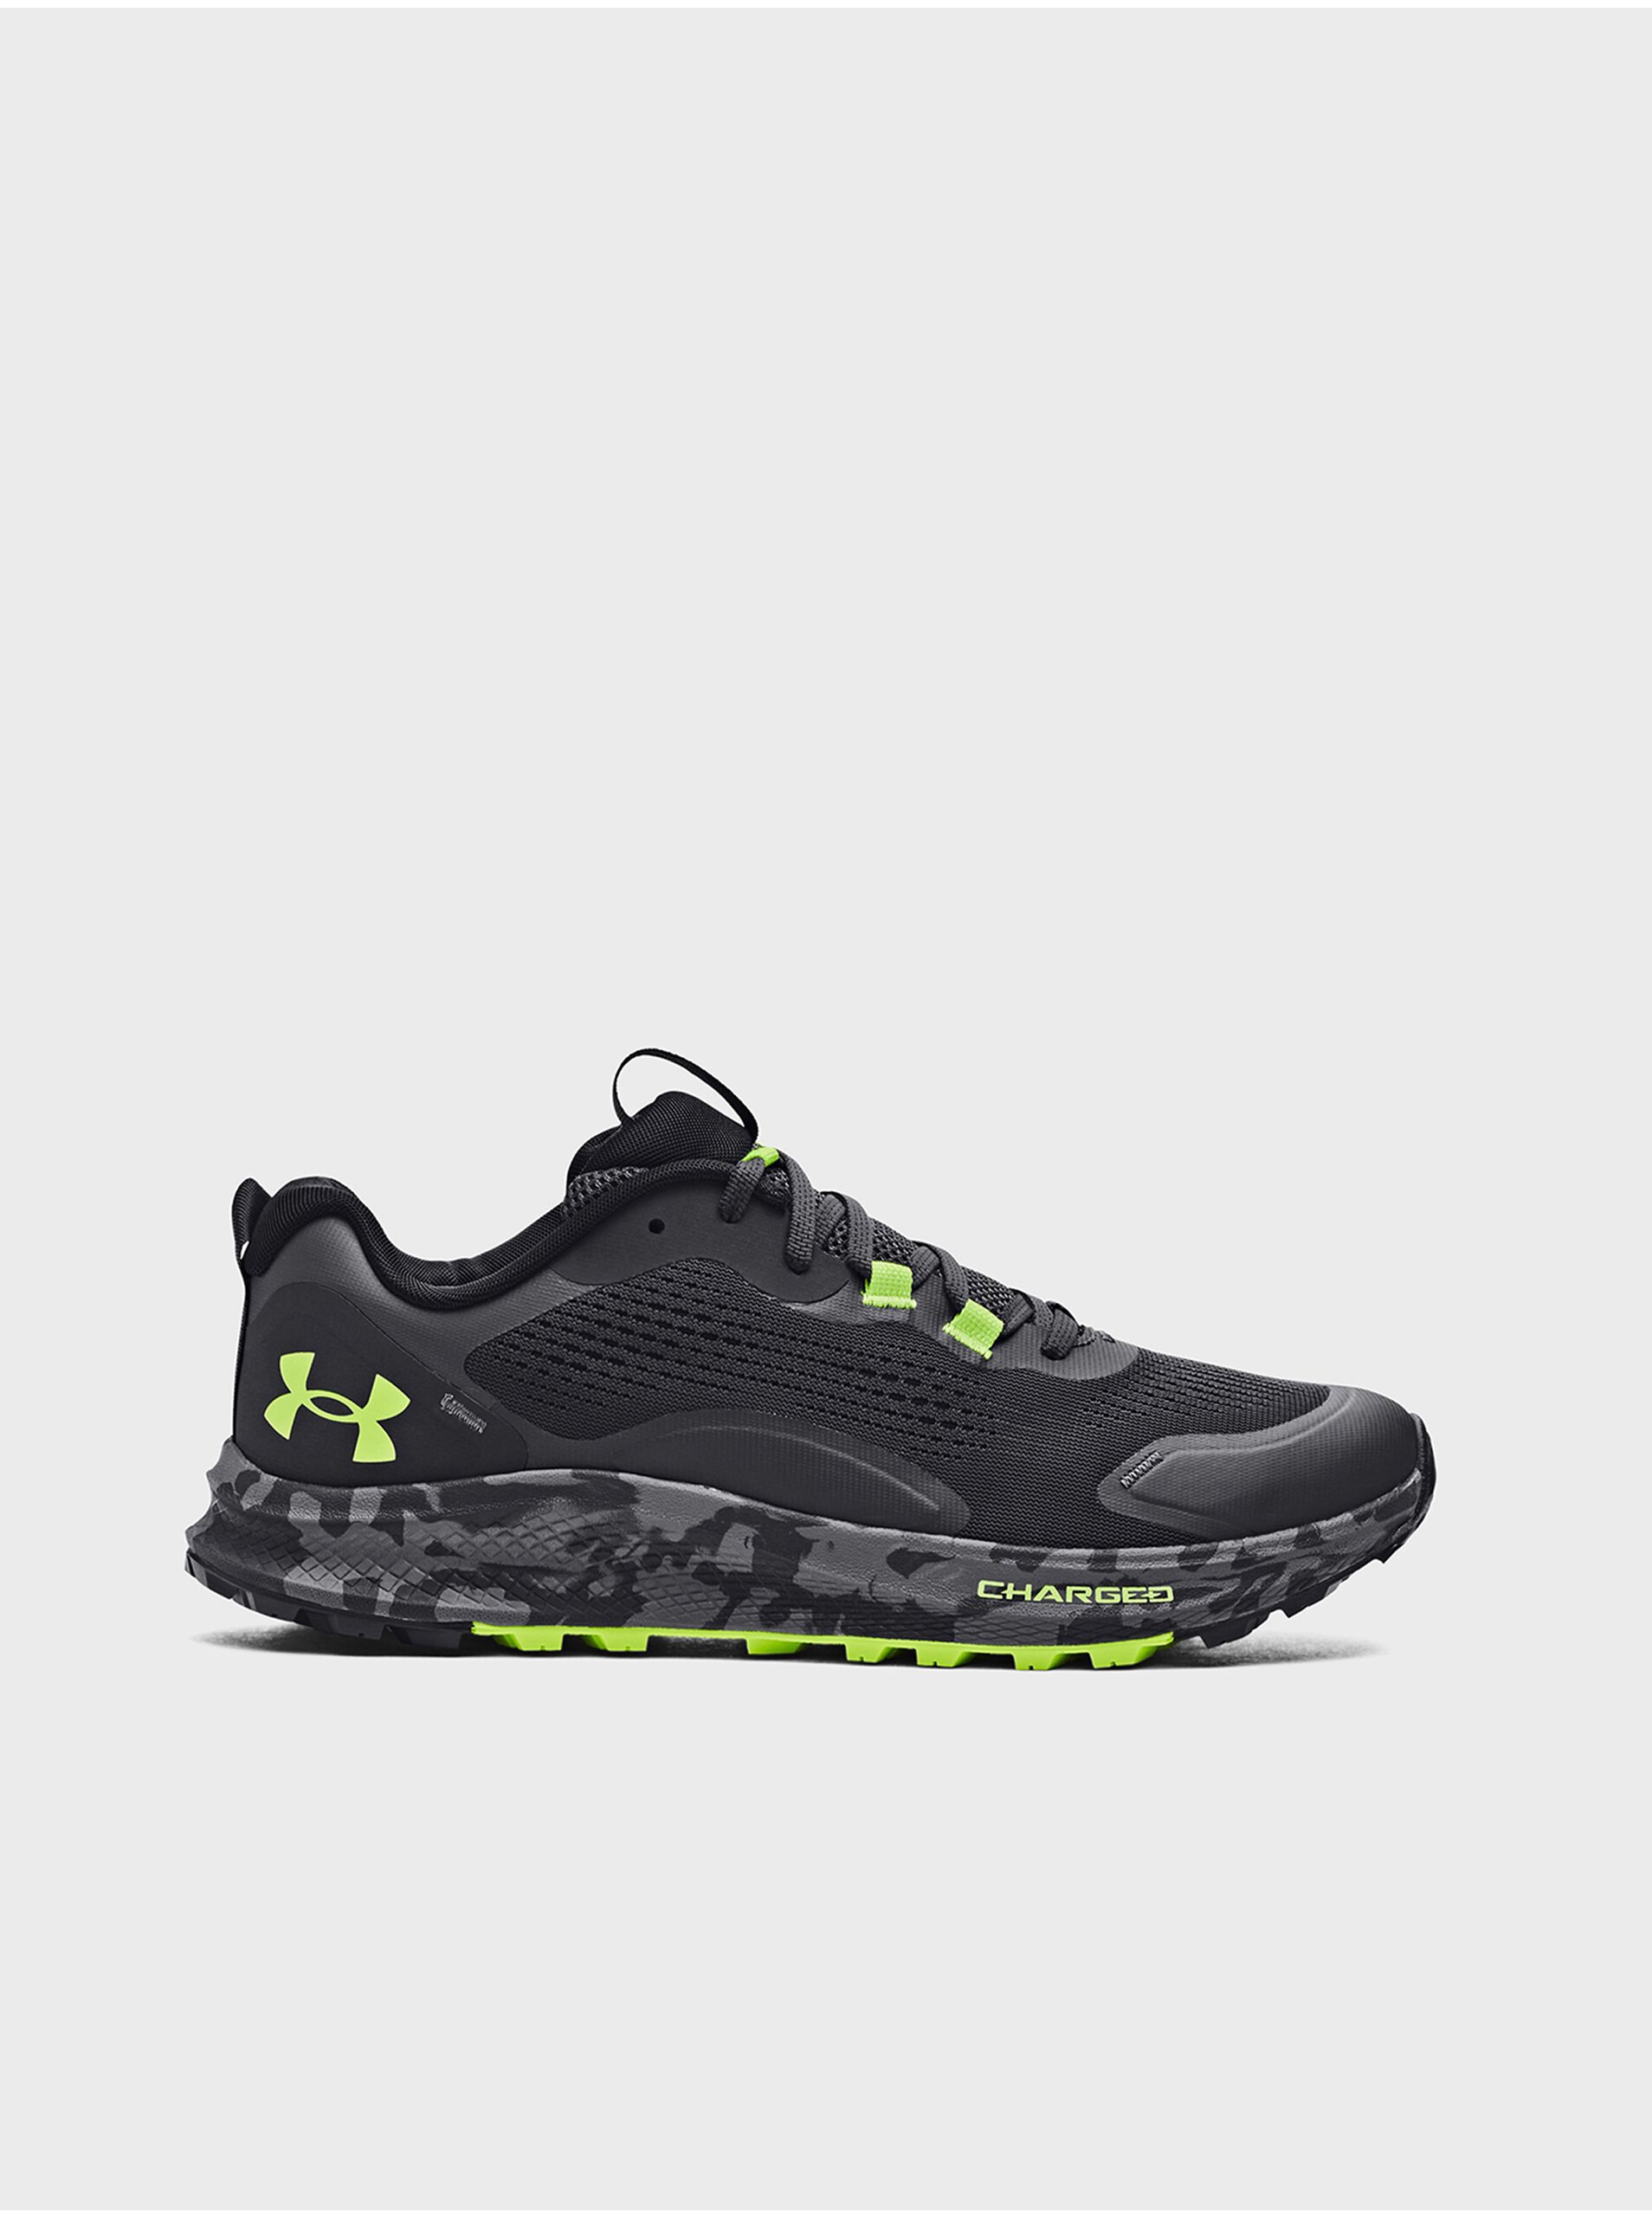 E-shop Boty Under Armour UA Charged Bandit TR 2-GRY